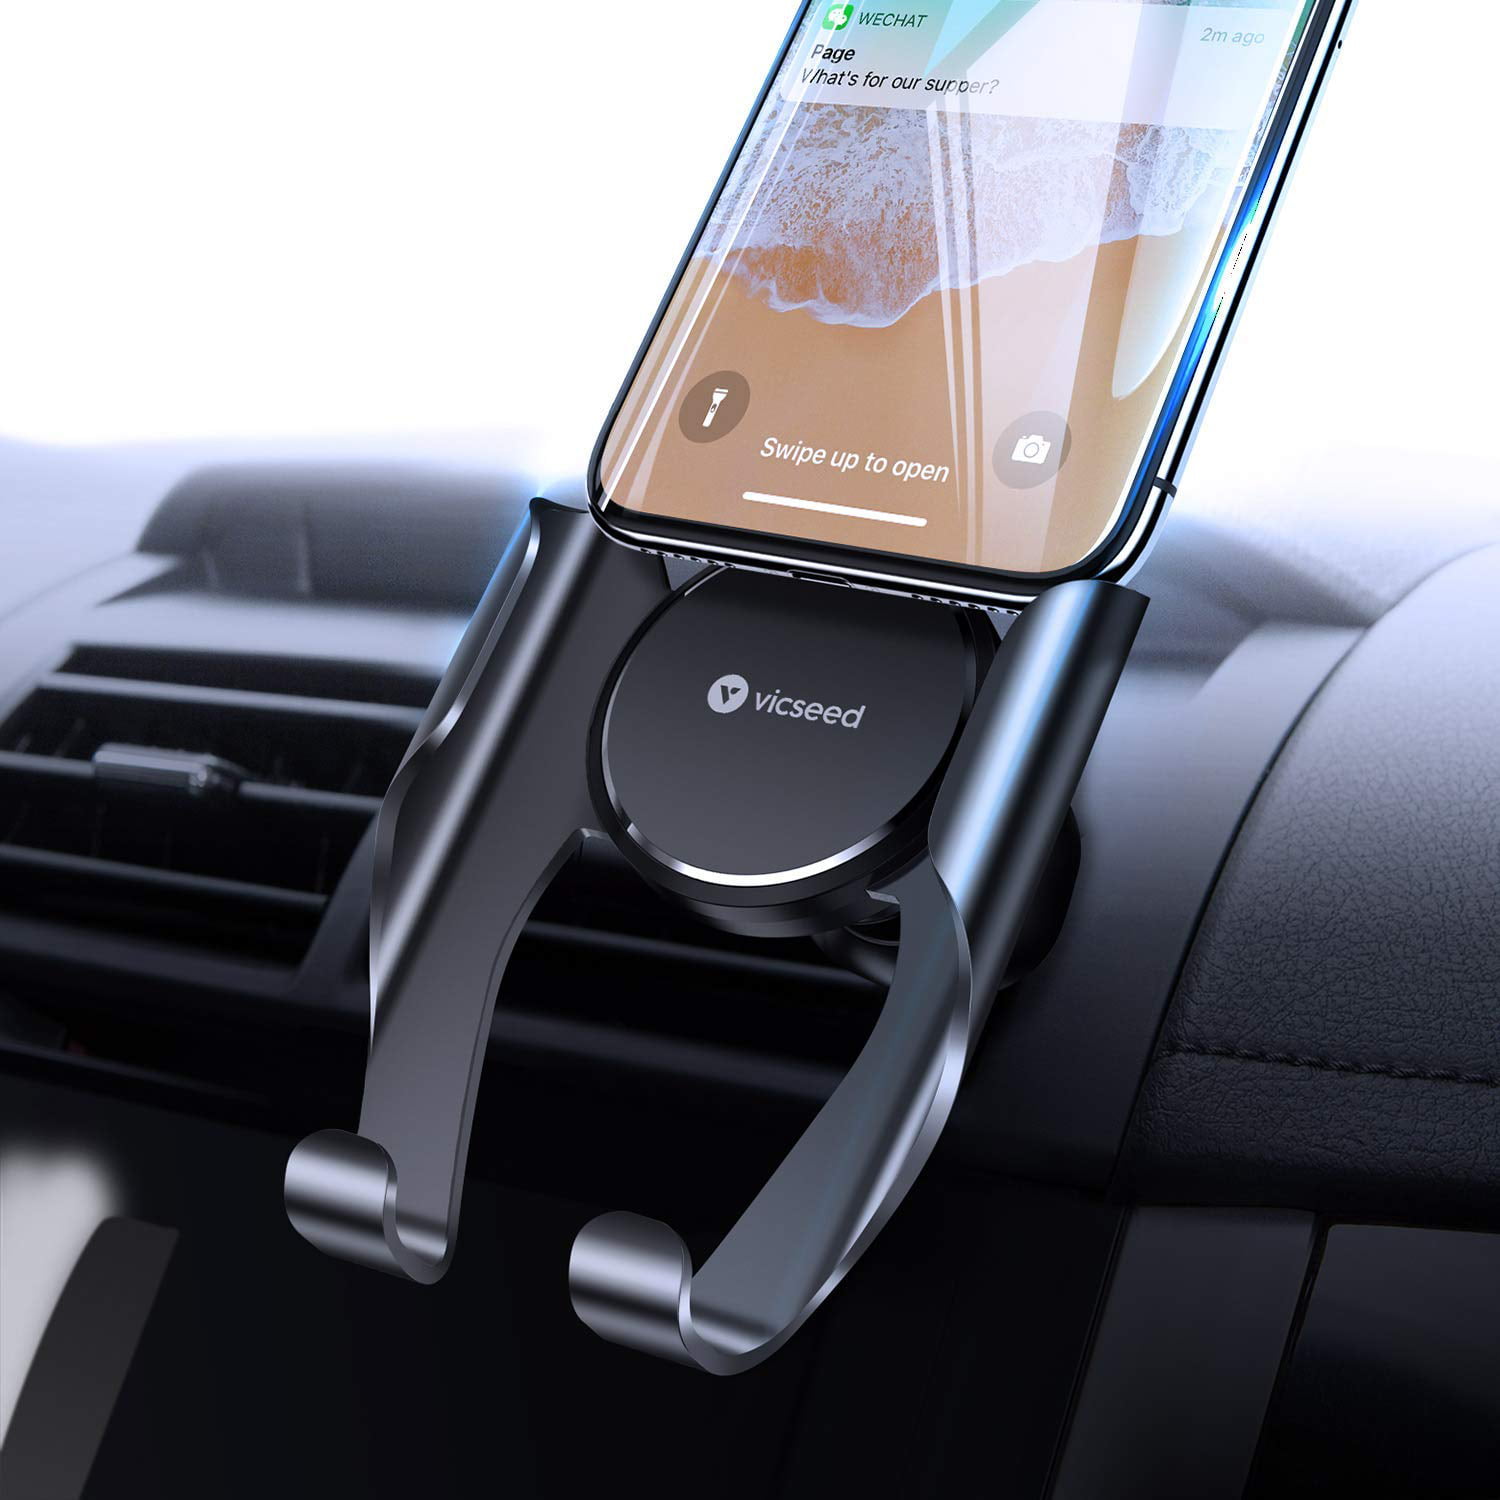 Handsfree Car Mount 360 Degree Cell Phone Holder for Car Air Vent Horizontal & Vertical Place Compatible iPhone XR XS X 8 7 6S Car Phone Mount,Car Phone Holder Air Vent Galaxy S10/S9/S8 